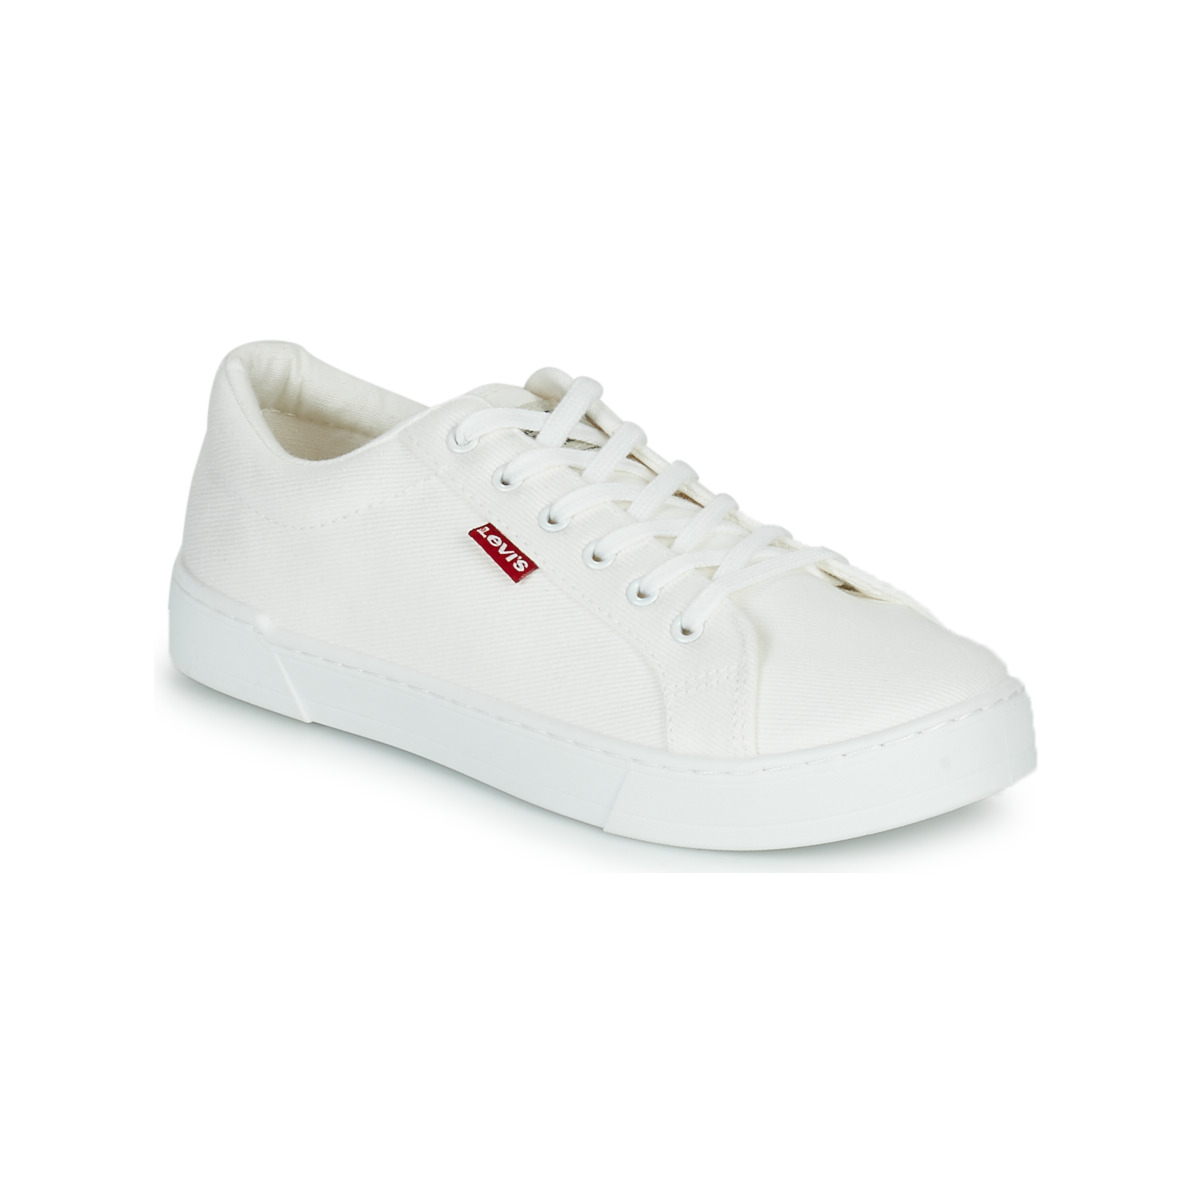 Levi's MALIBU 2.0 White - Free delivery | Spartoo UK ! - Shoes Low top  trainers Women £ 33.14